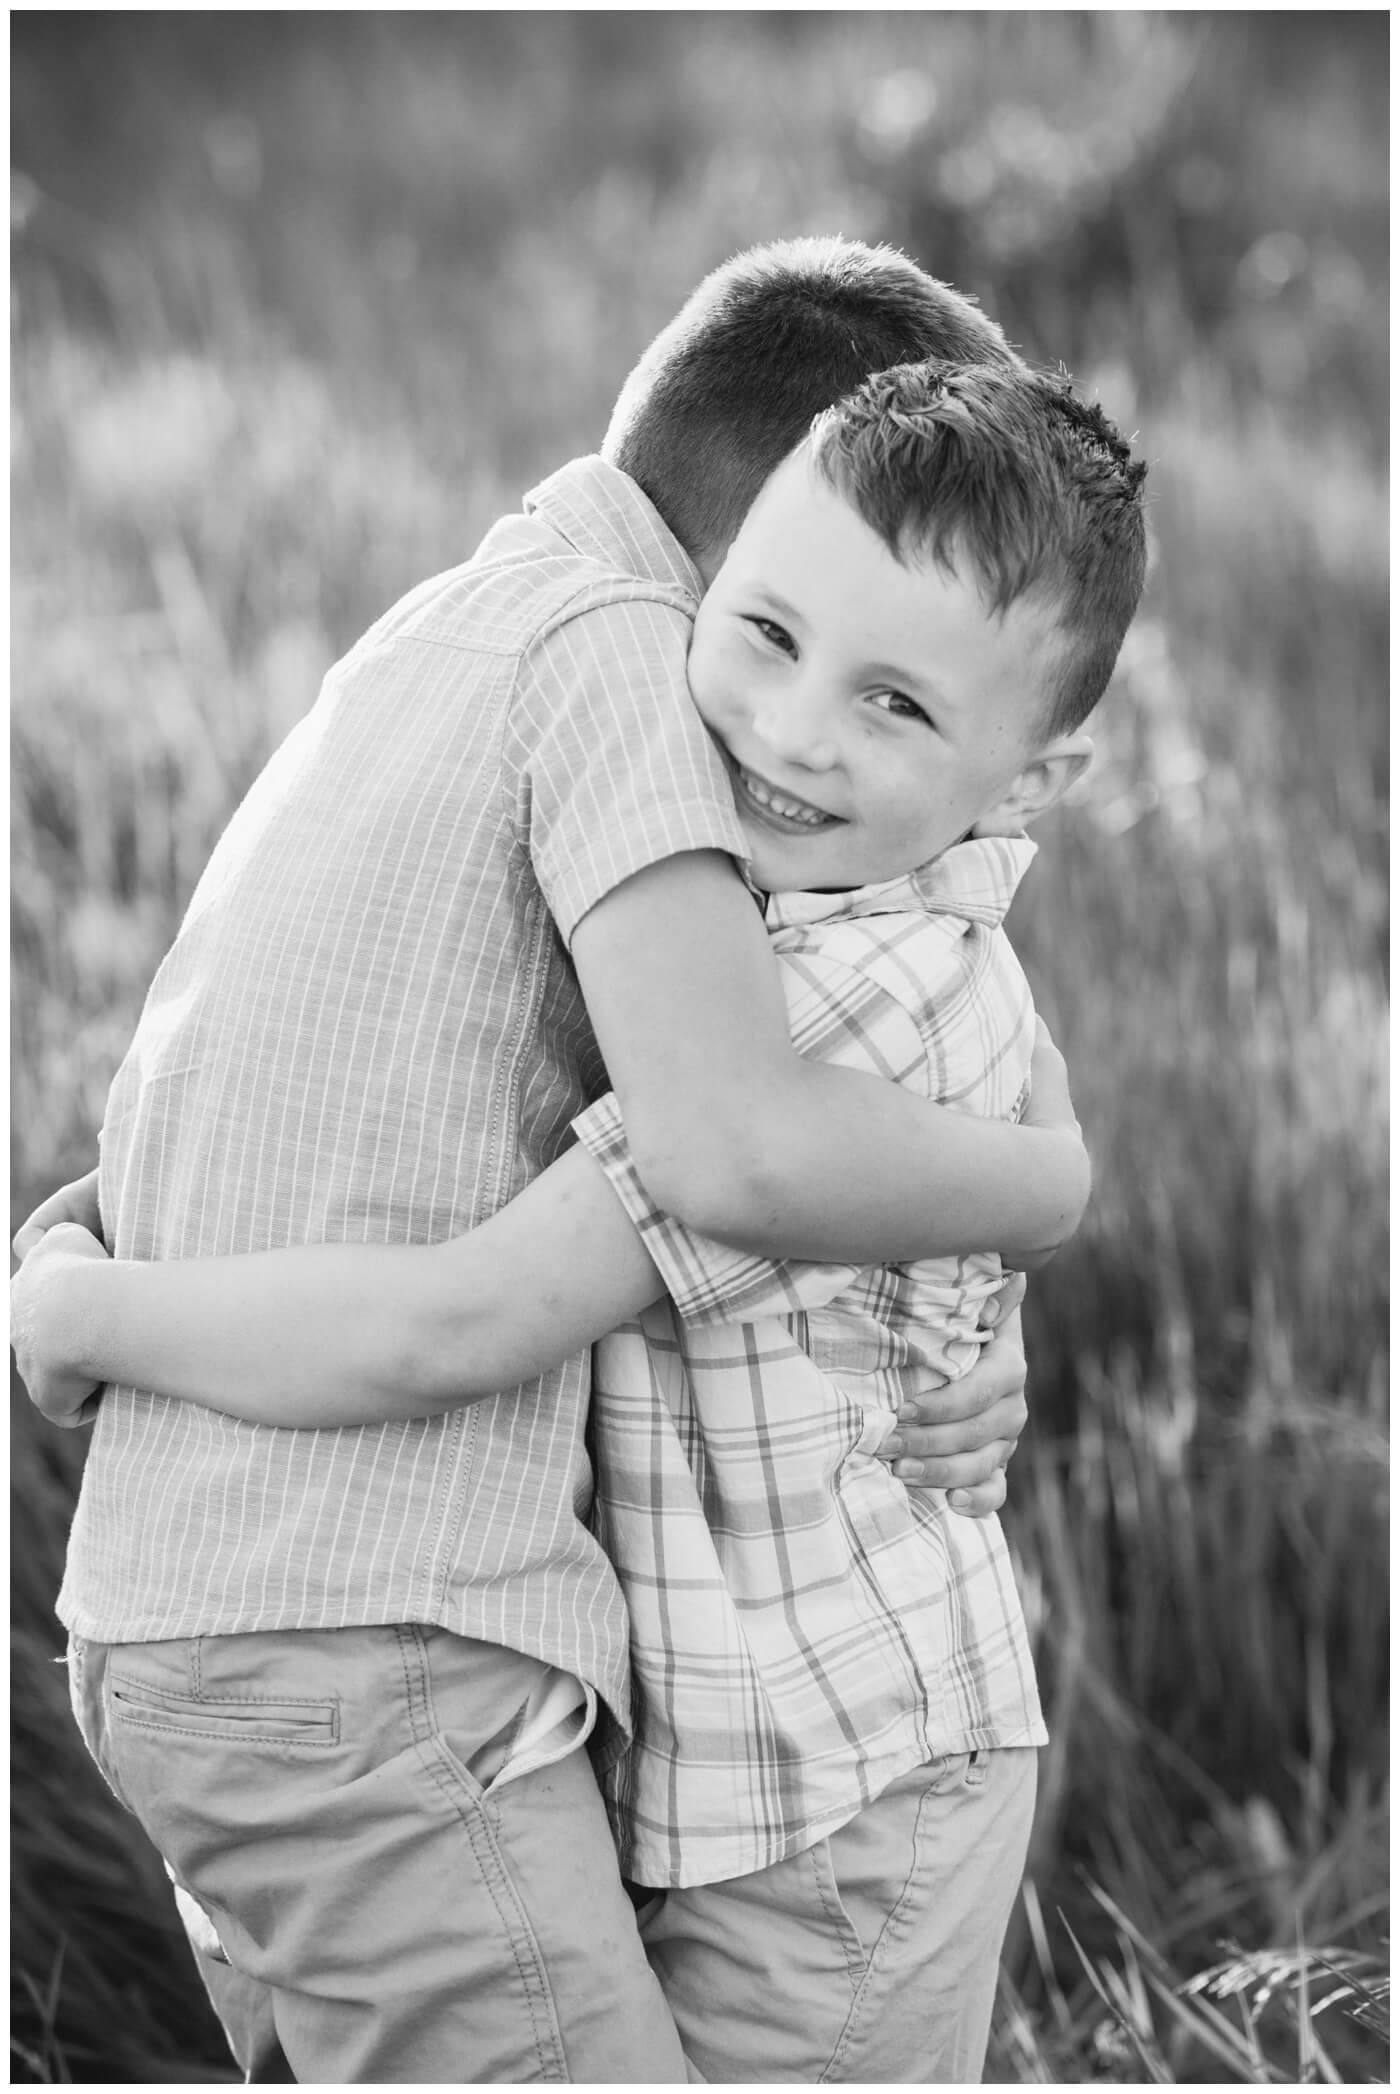 Brent & Courtney -07 - Black and white of young brothers hugging